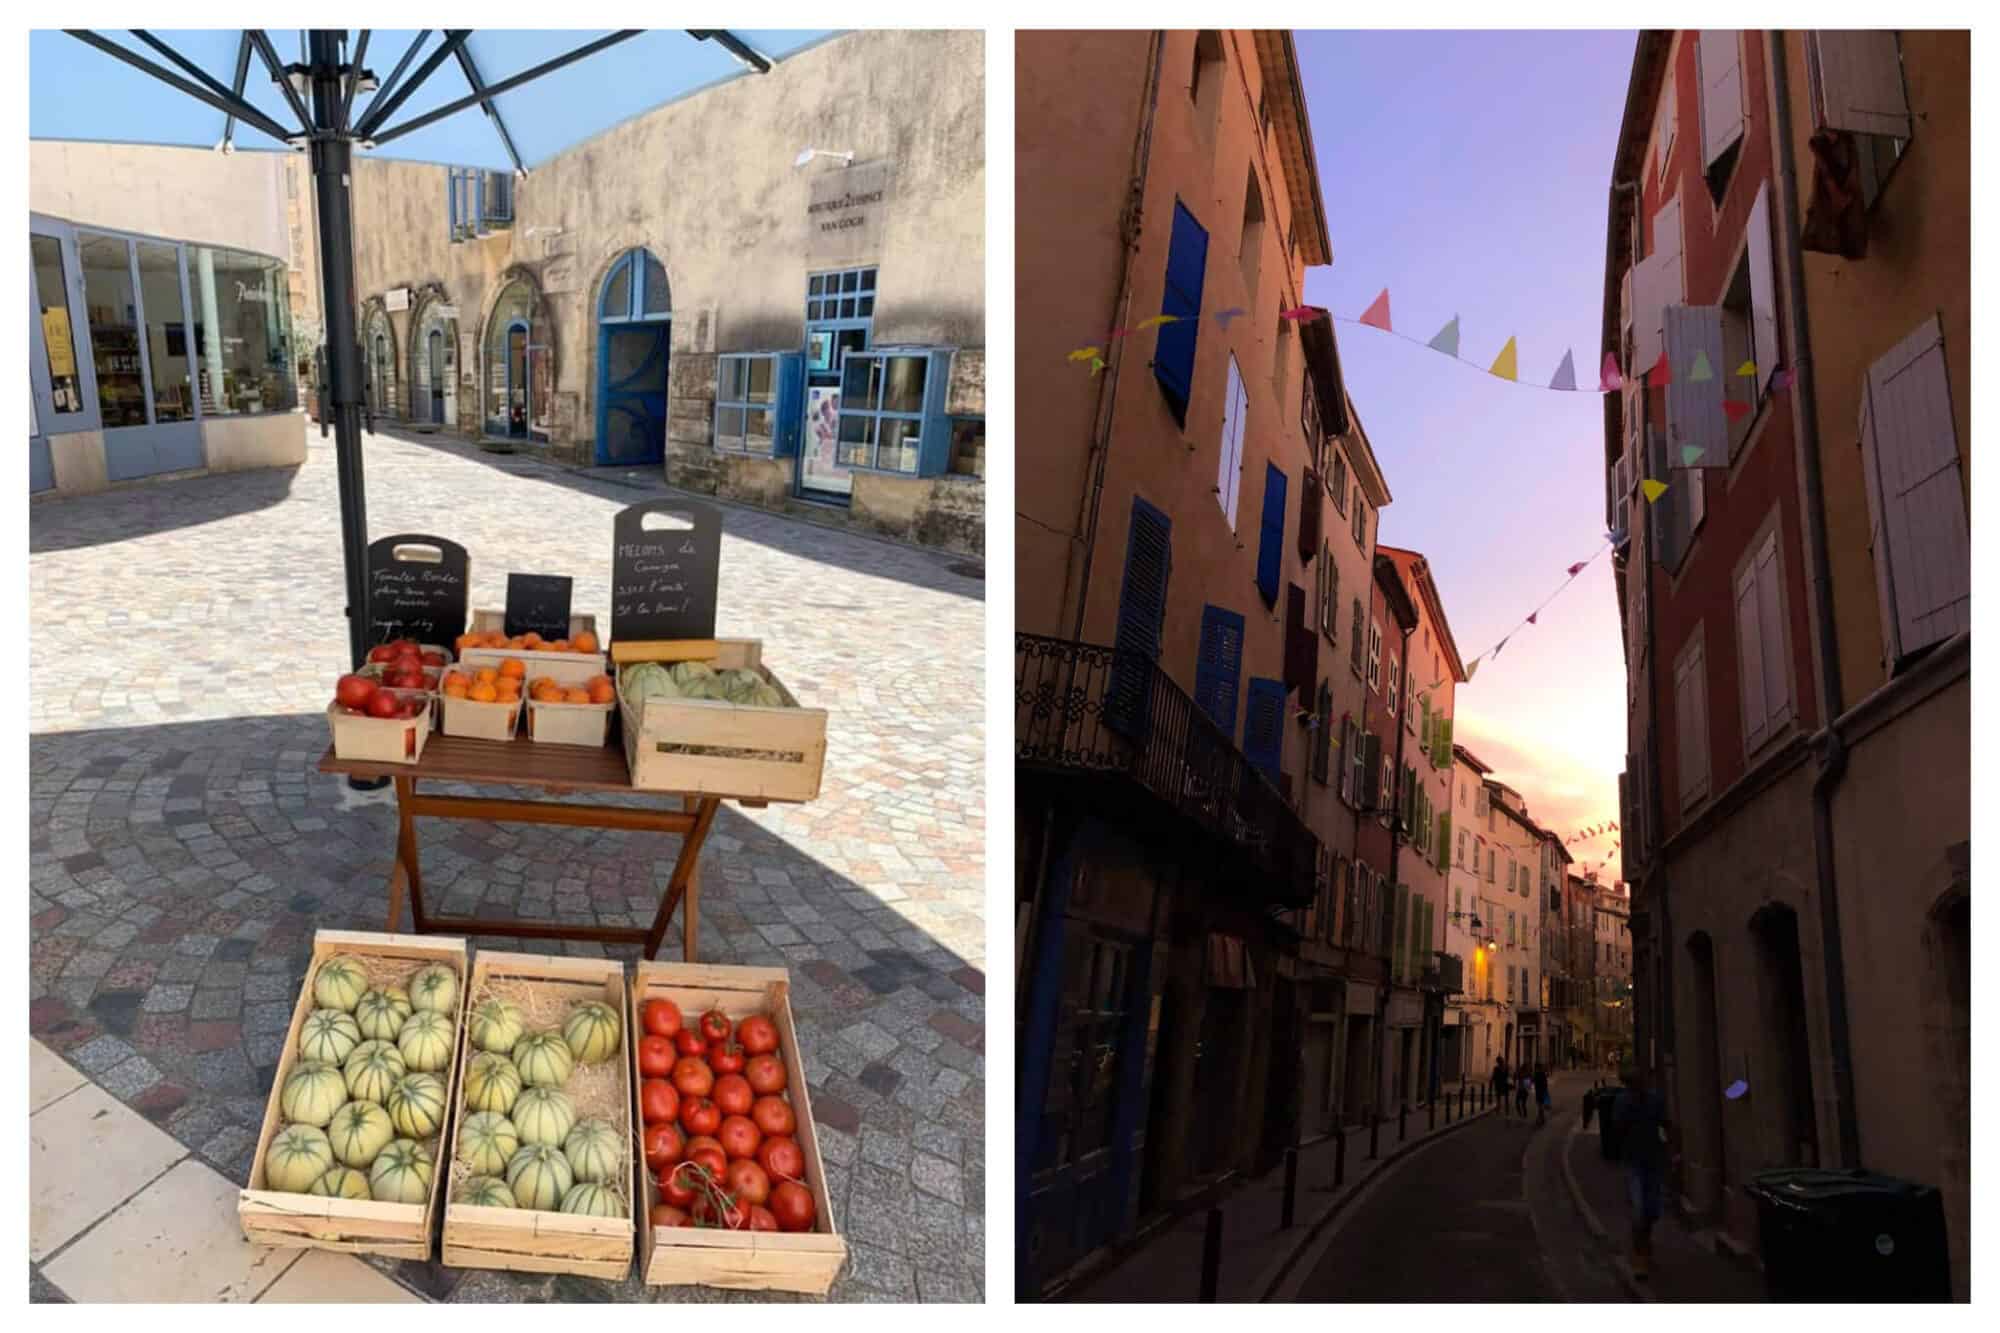 Left: Fresh produce, including cantaloupe and tomatoes, sit in wooden produce boxes at Fraîcheur et Délices in Arles, Right: A colorful street in Provence, lined with small triangle flags, is empty just after sundown.